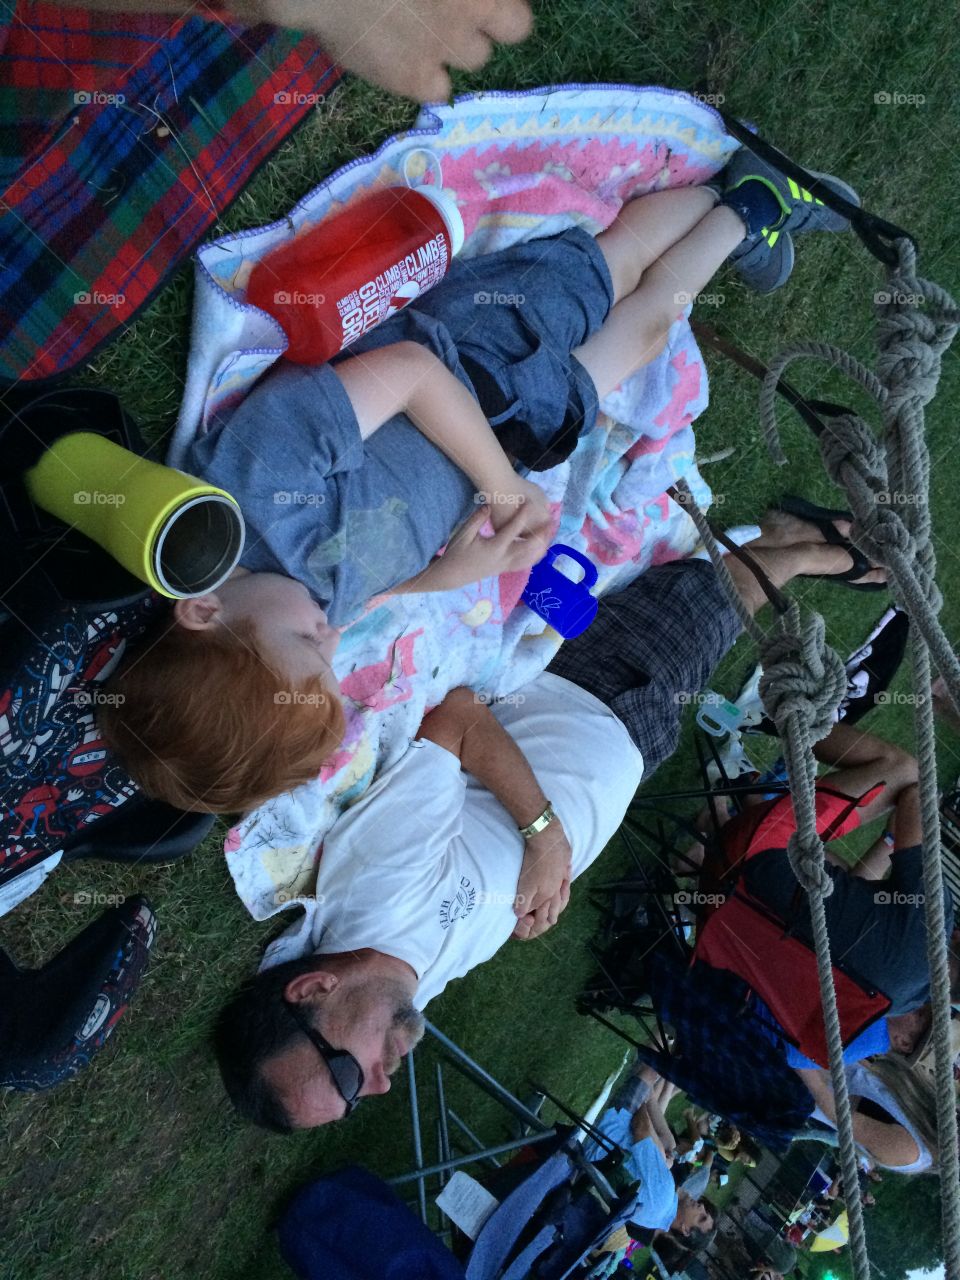 River fest Elora 2016
Sleeping on the grass with grandpa